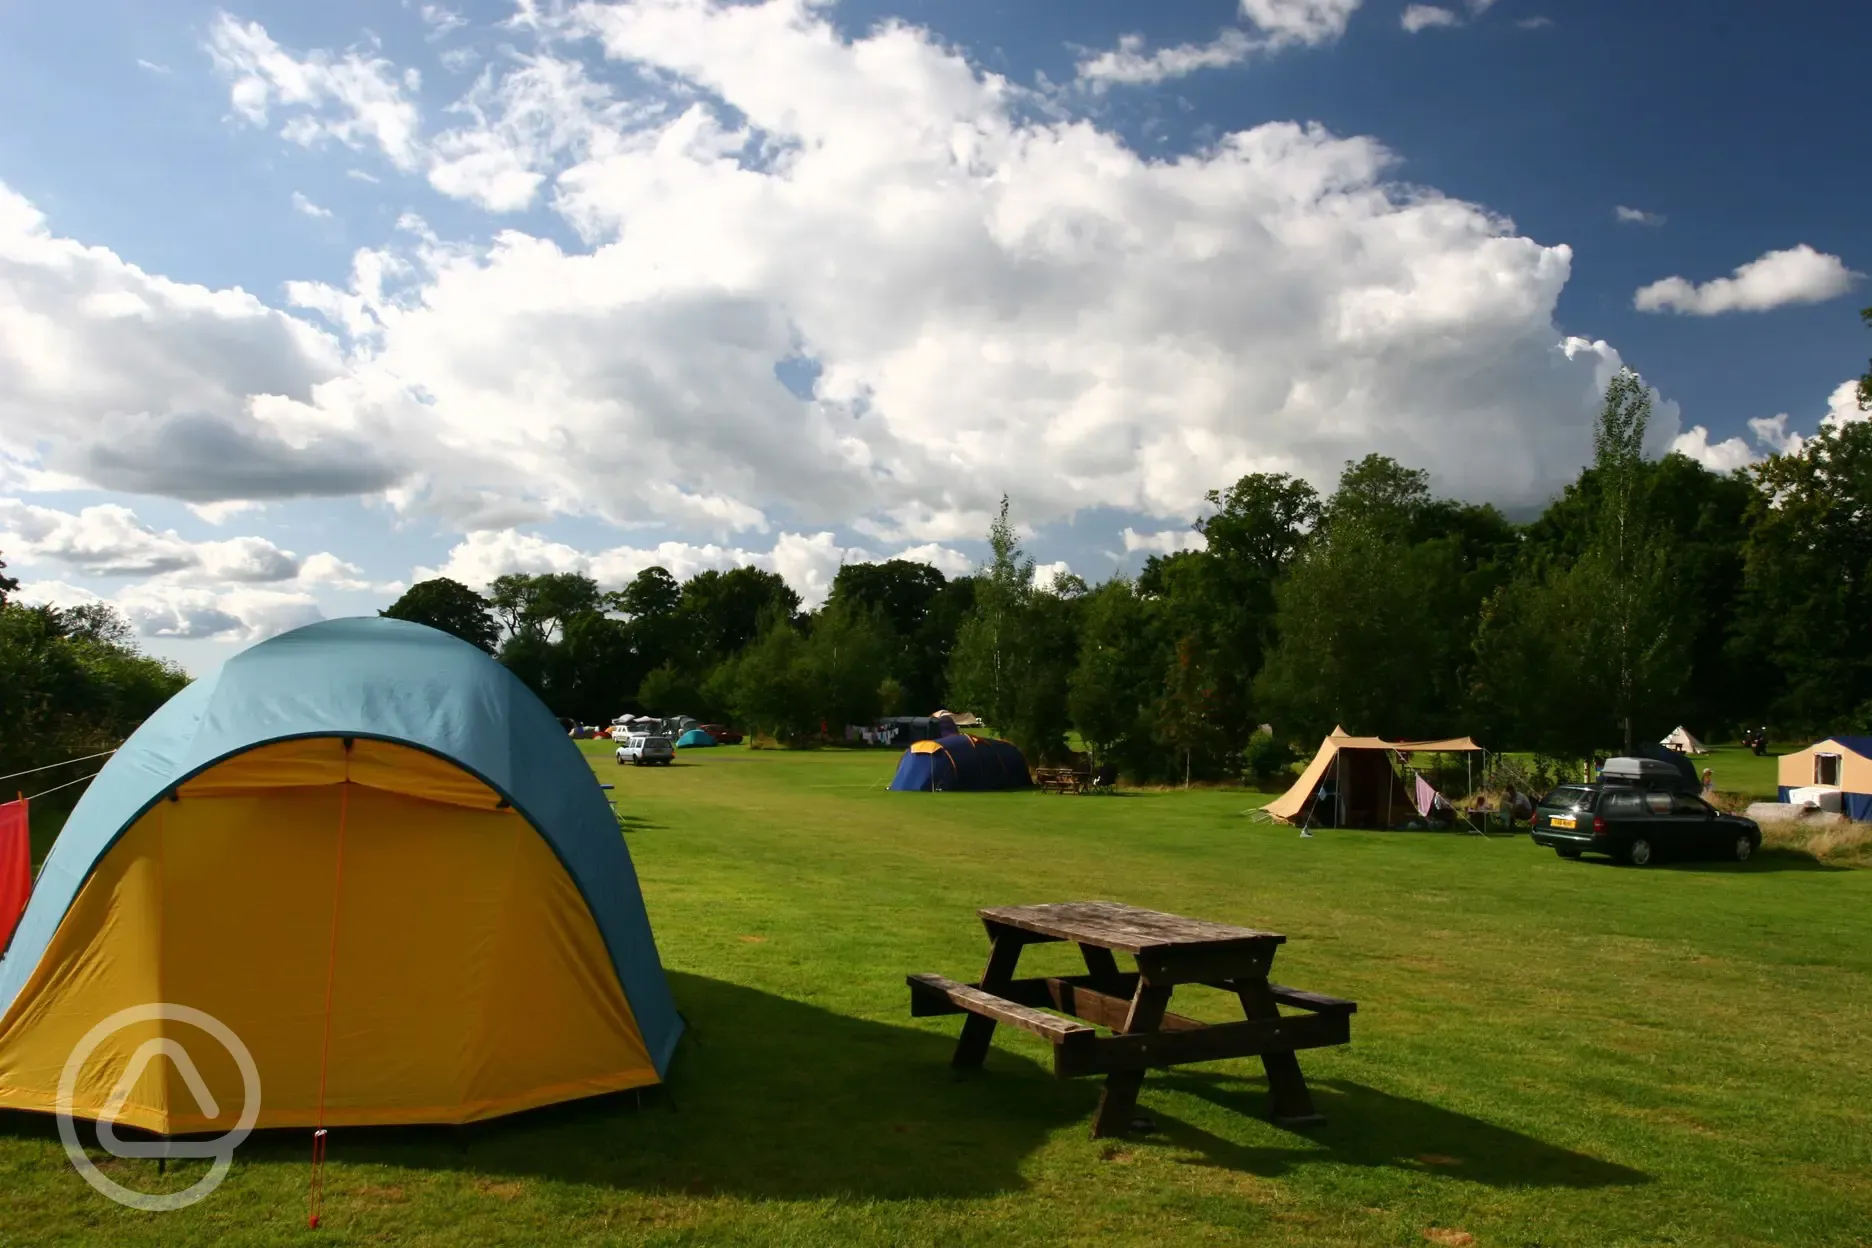 The meadow, tranquil tent area